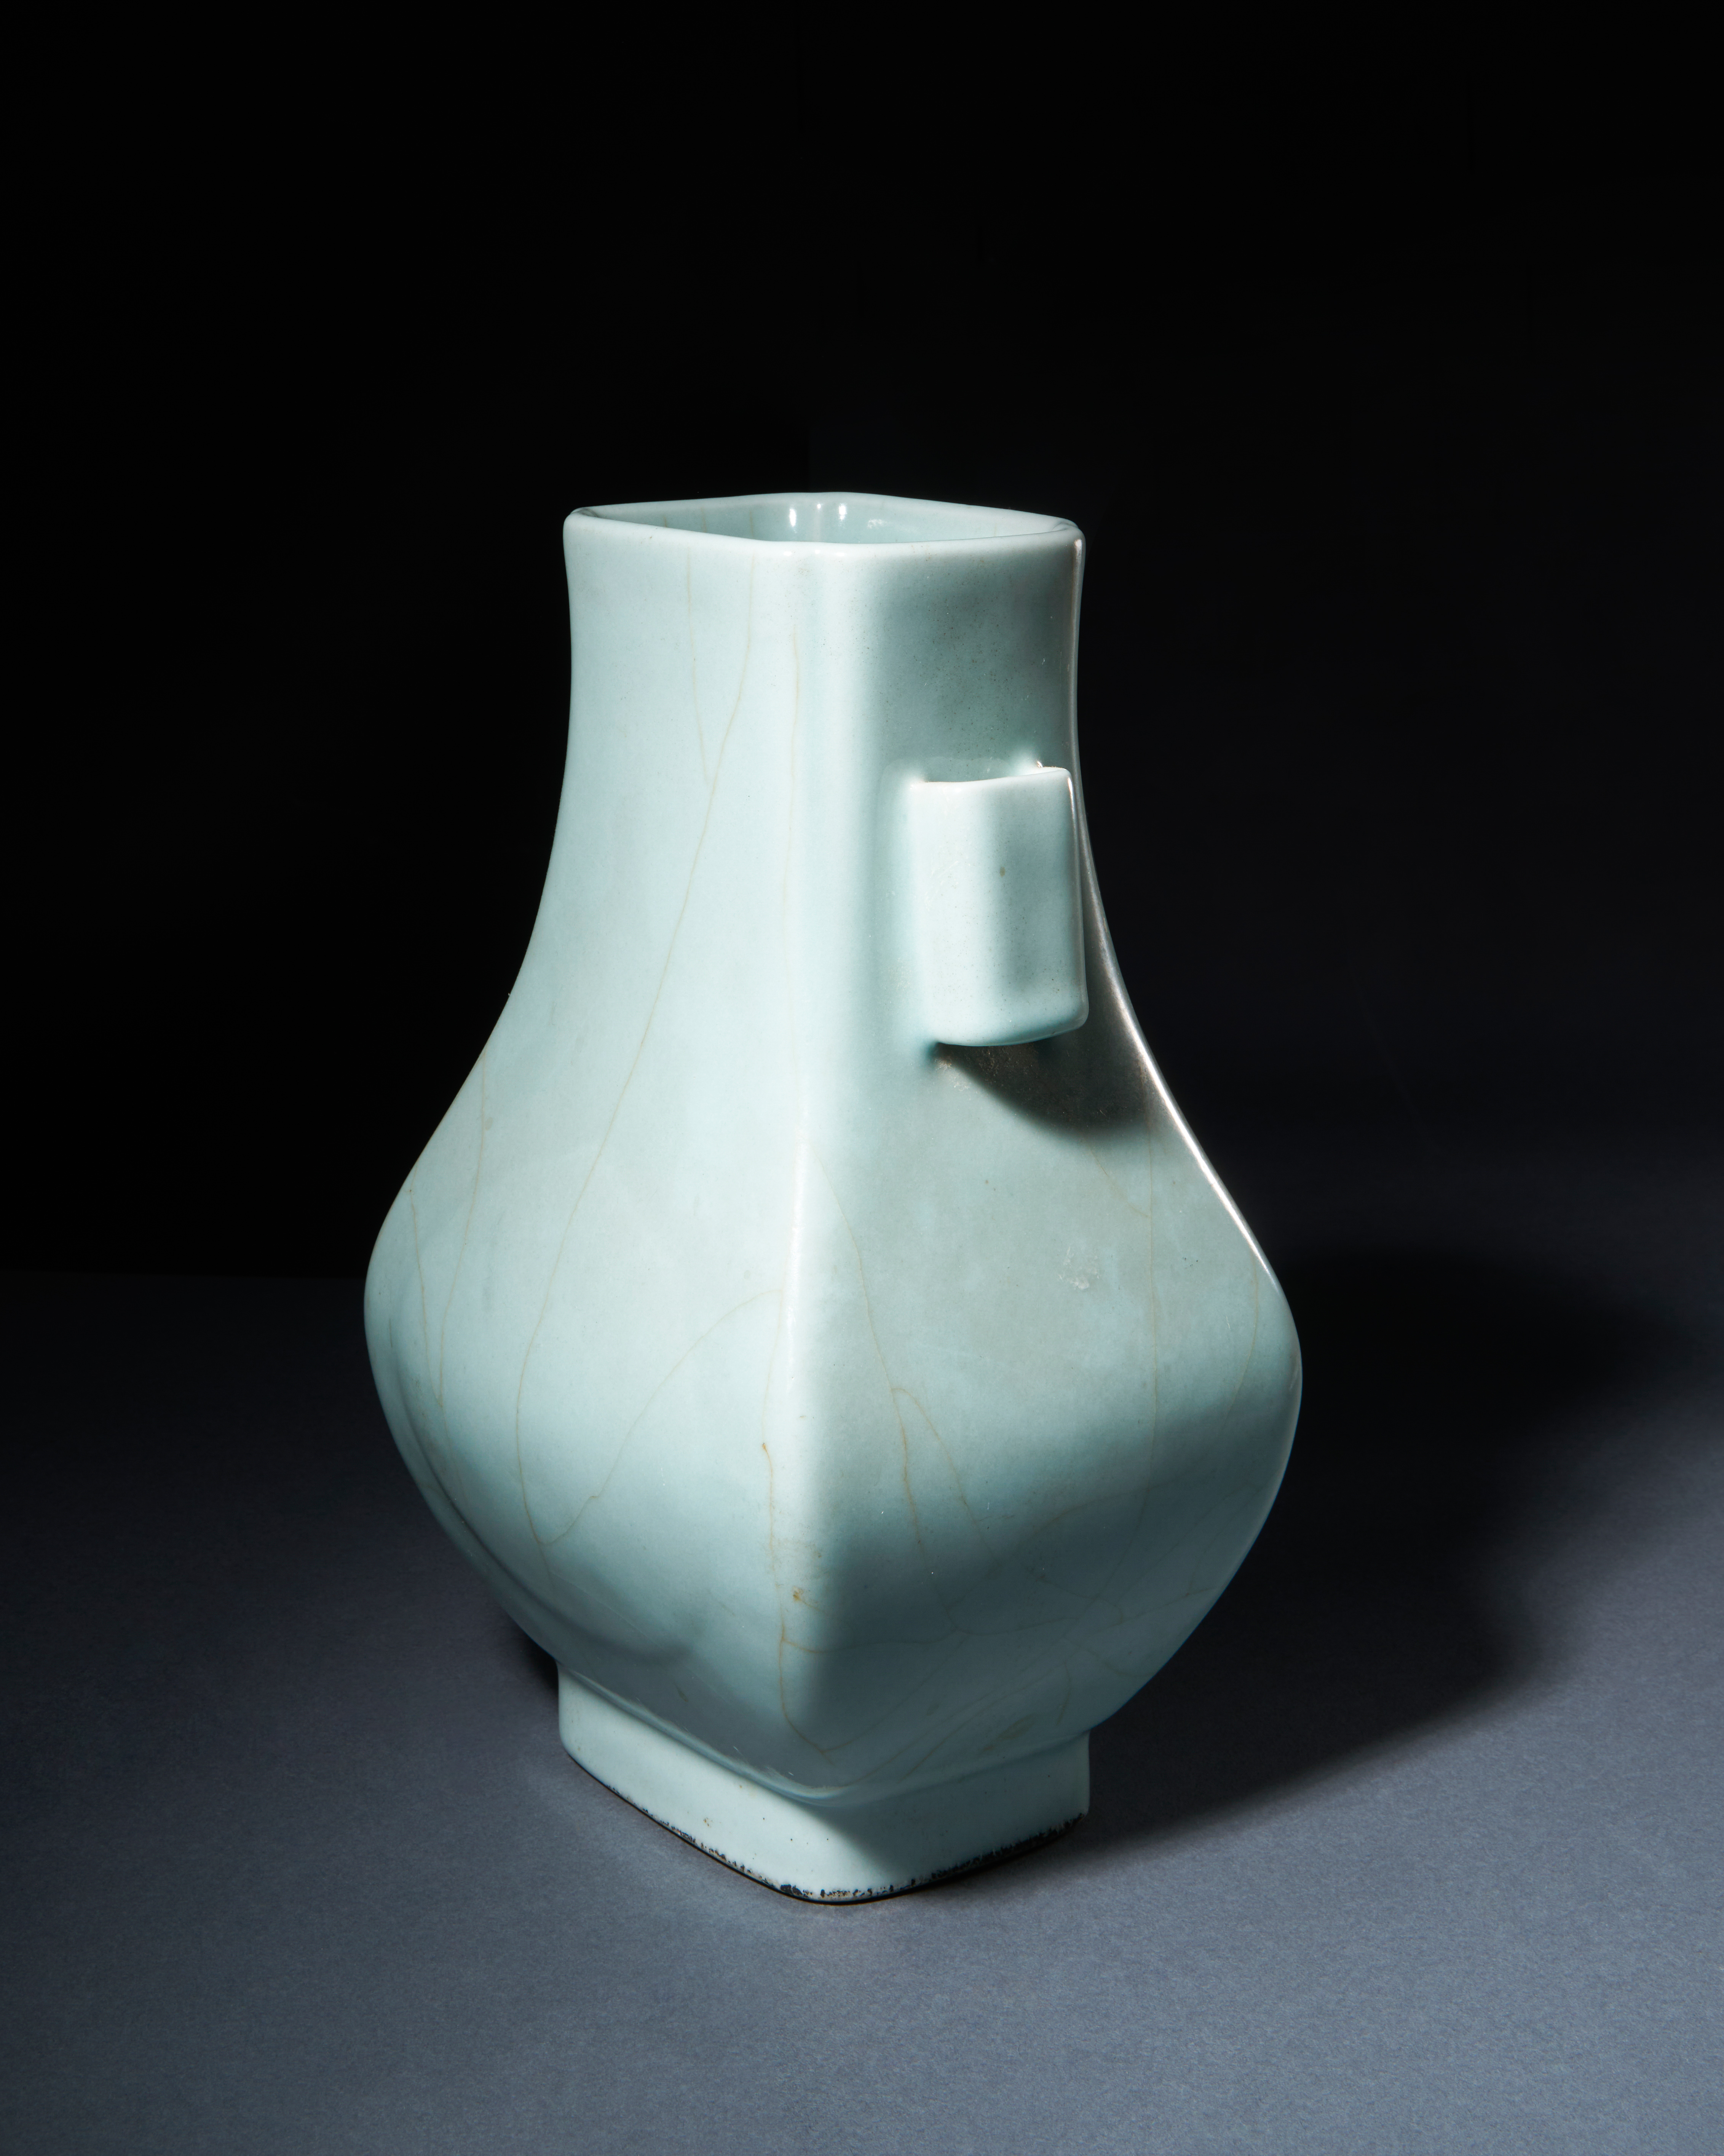 A GUAN-TYPE HU-FORM VASE GUANGXU SIX-CHARACTER MARK IN UNDERGLAZE BLUE AND OF THE PERIOD (1875-1908) - Image 3 of 4